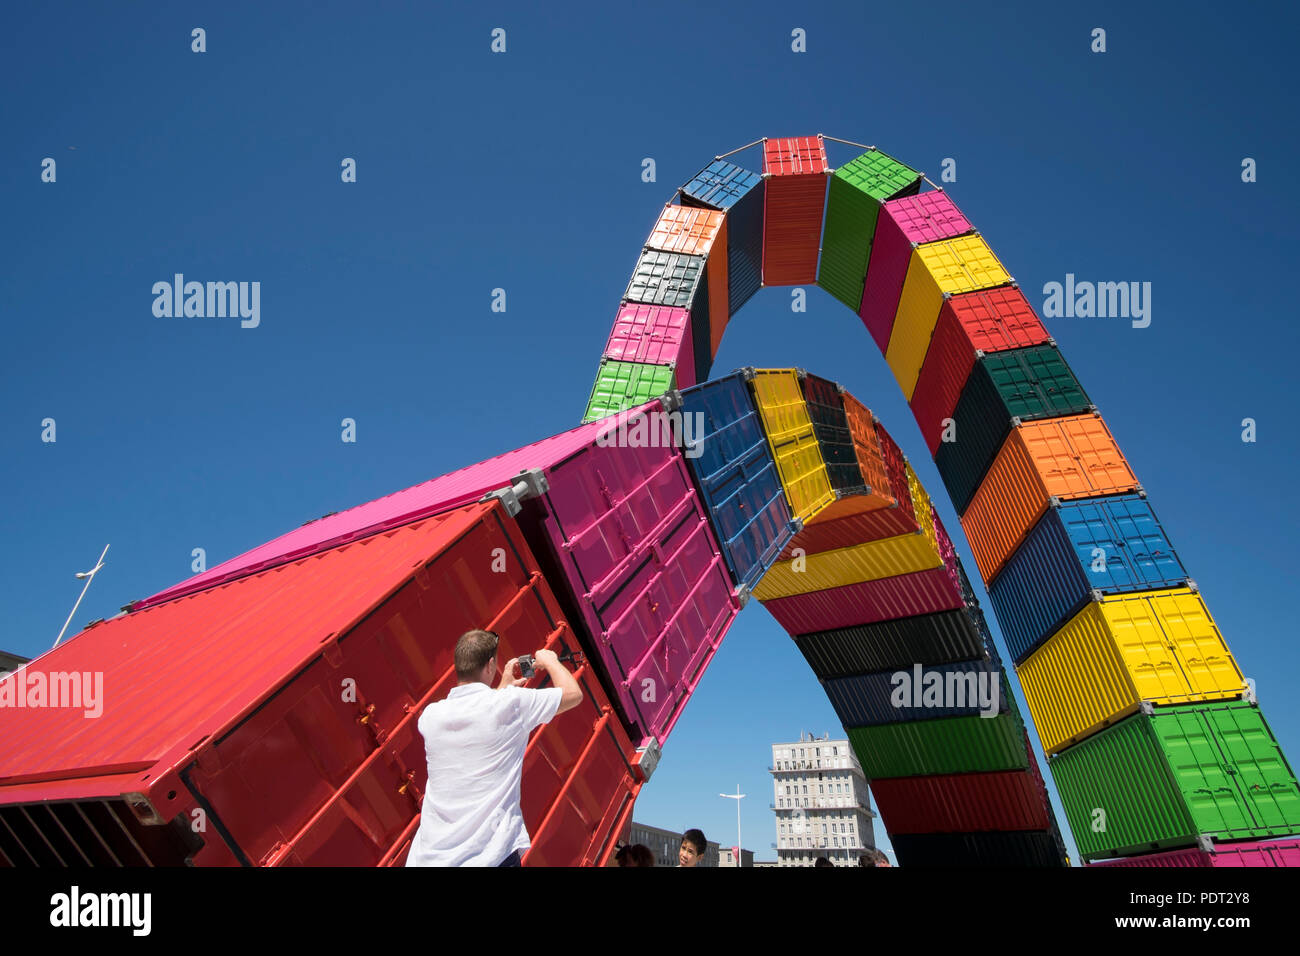 Le Havre (Normandy, north western France): 'Catene de Containers', by artist Vincent Ganivet, work of art for the festivities of the city’s 500th anni Stock Photo